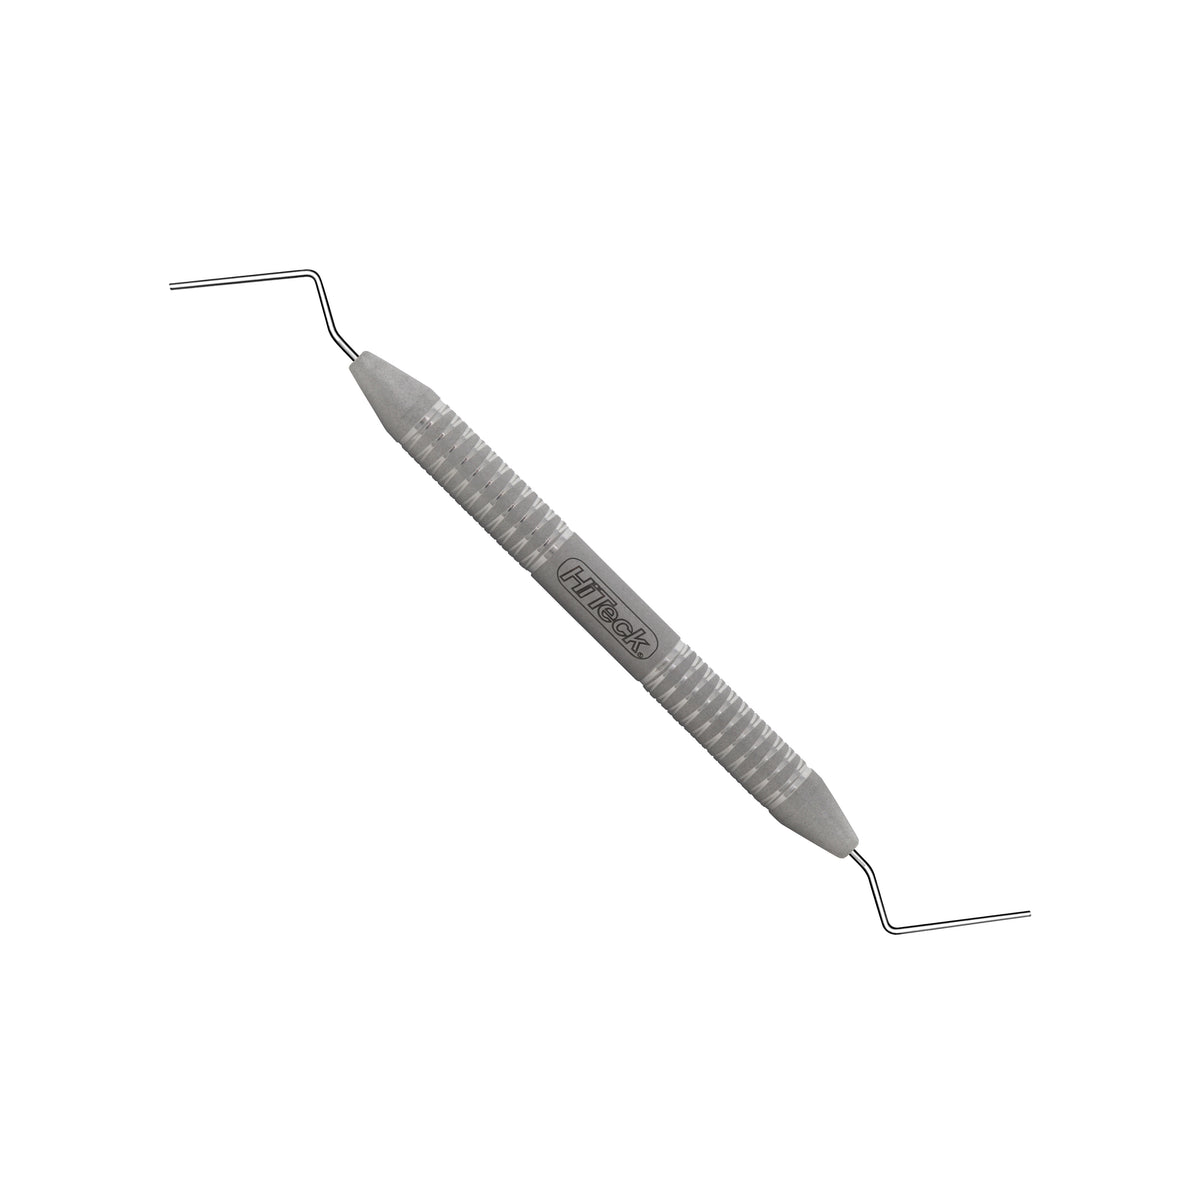 9/11 Root Canal Plugger, 1.0/1.15, 21MM - HiTeck Medical Instruments